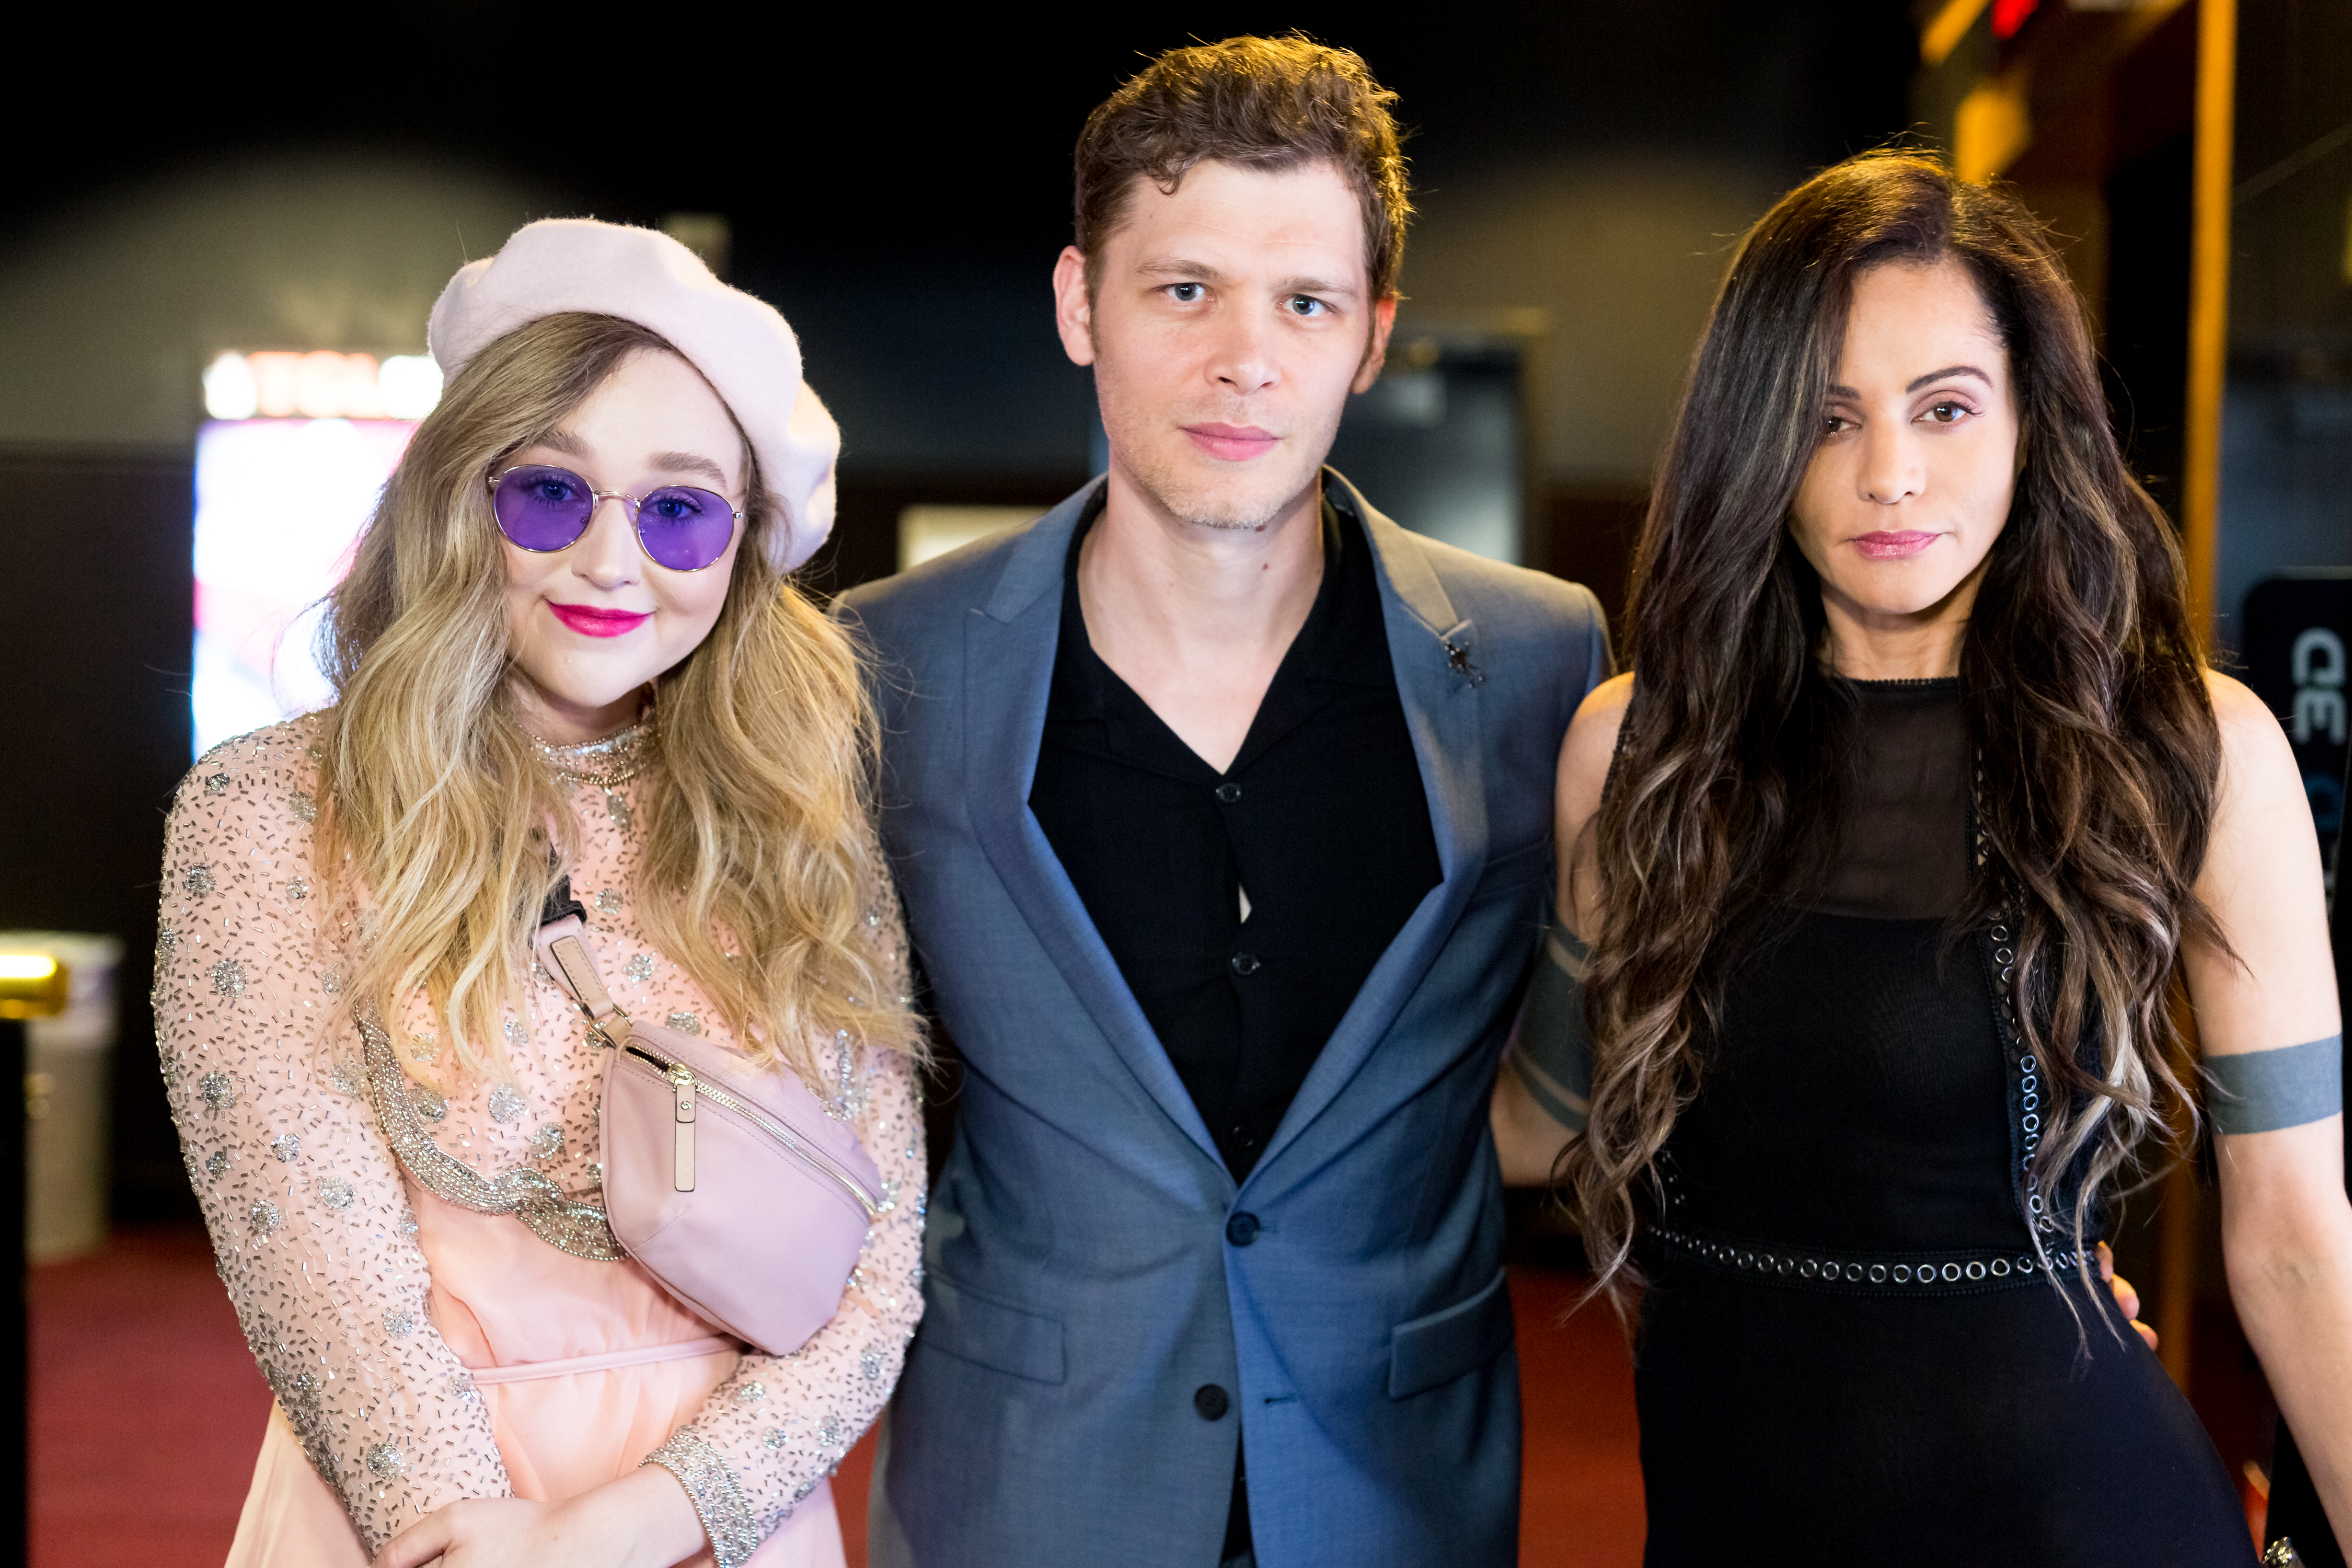 (L-R) Mecca White, Joseph Morgan and Persia White attend the 2019 Beverly Hills Film Festival Opening Night at TCL Chinese 6 Theatres on, April 3, 2019, in Hollywood, California. | Source: Getty Images